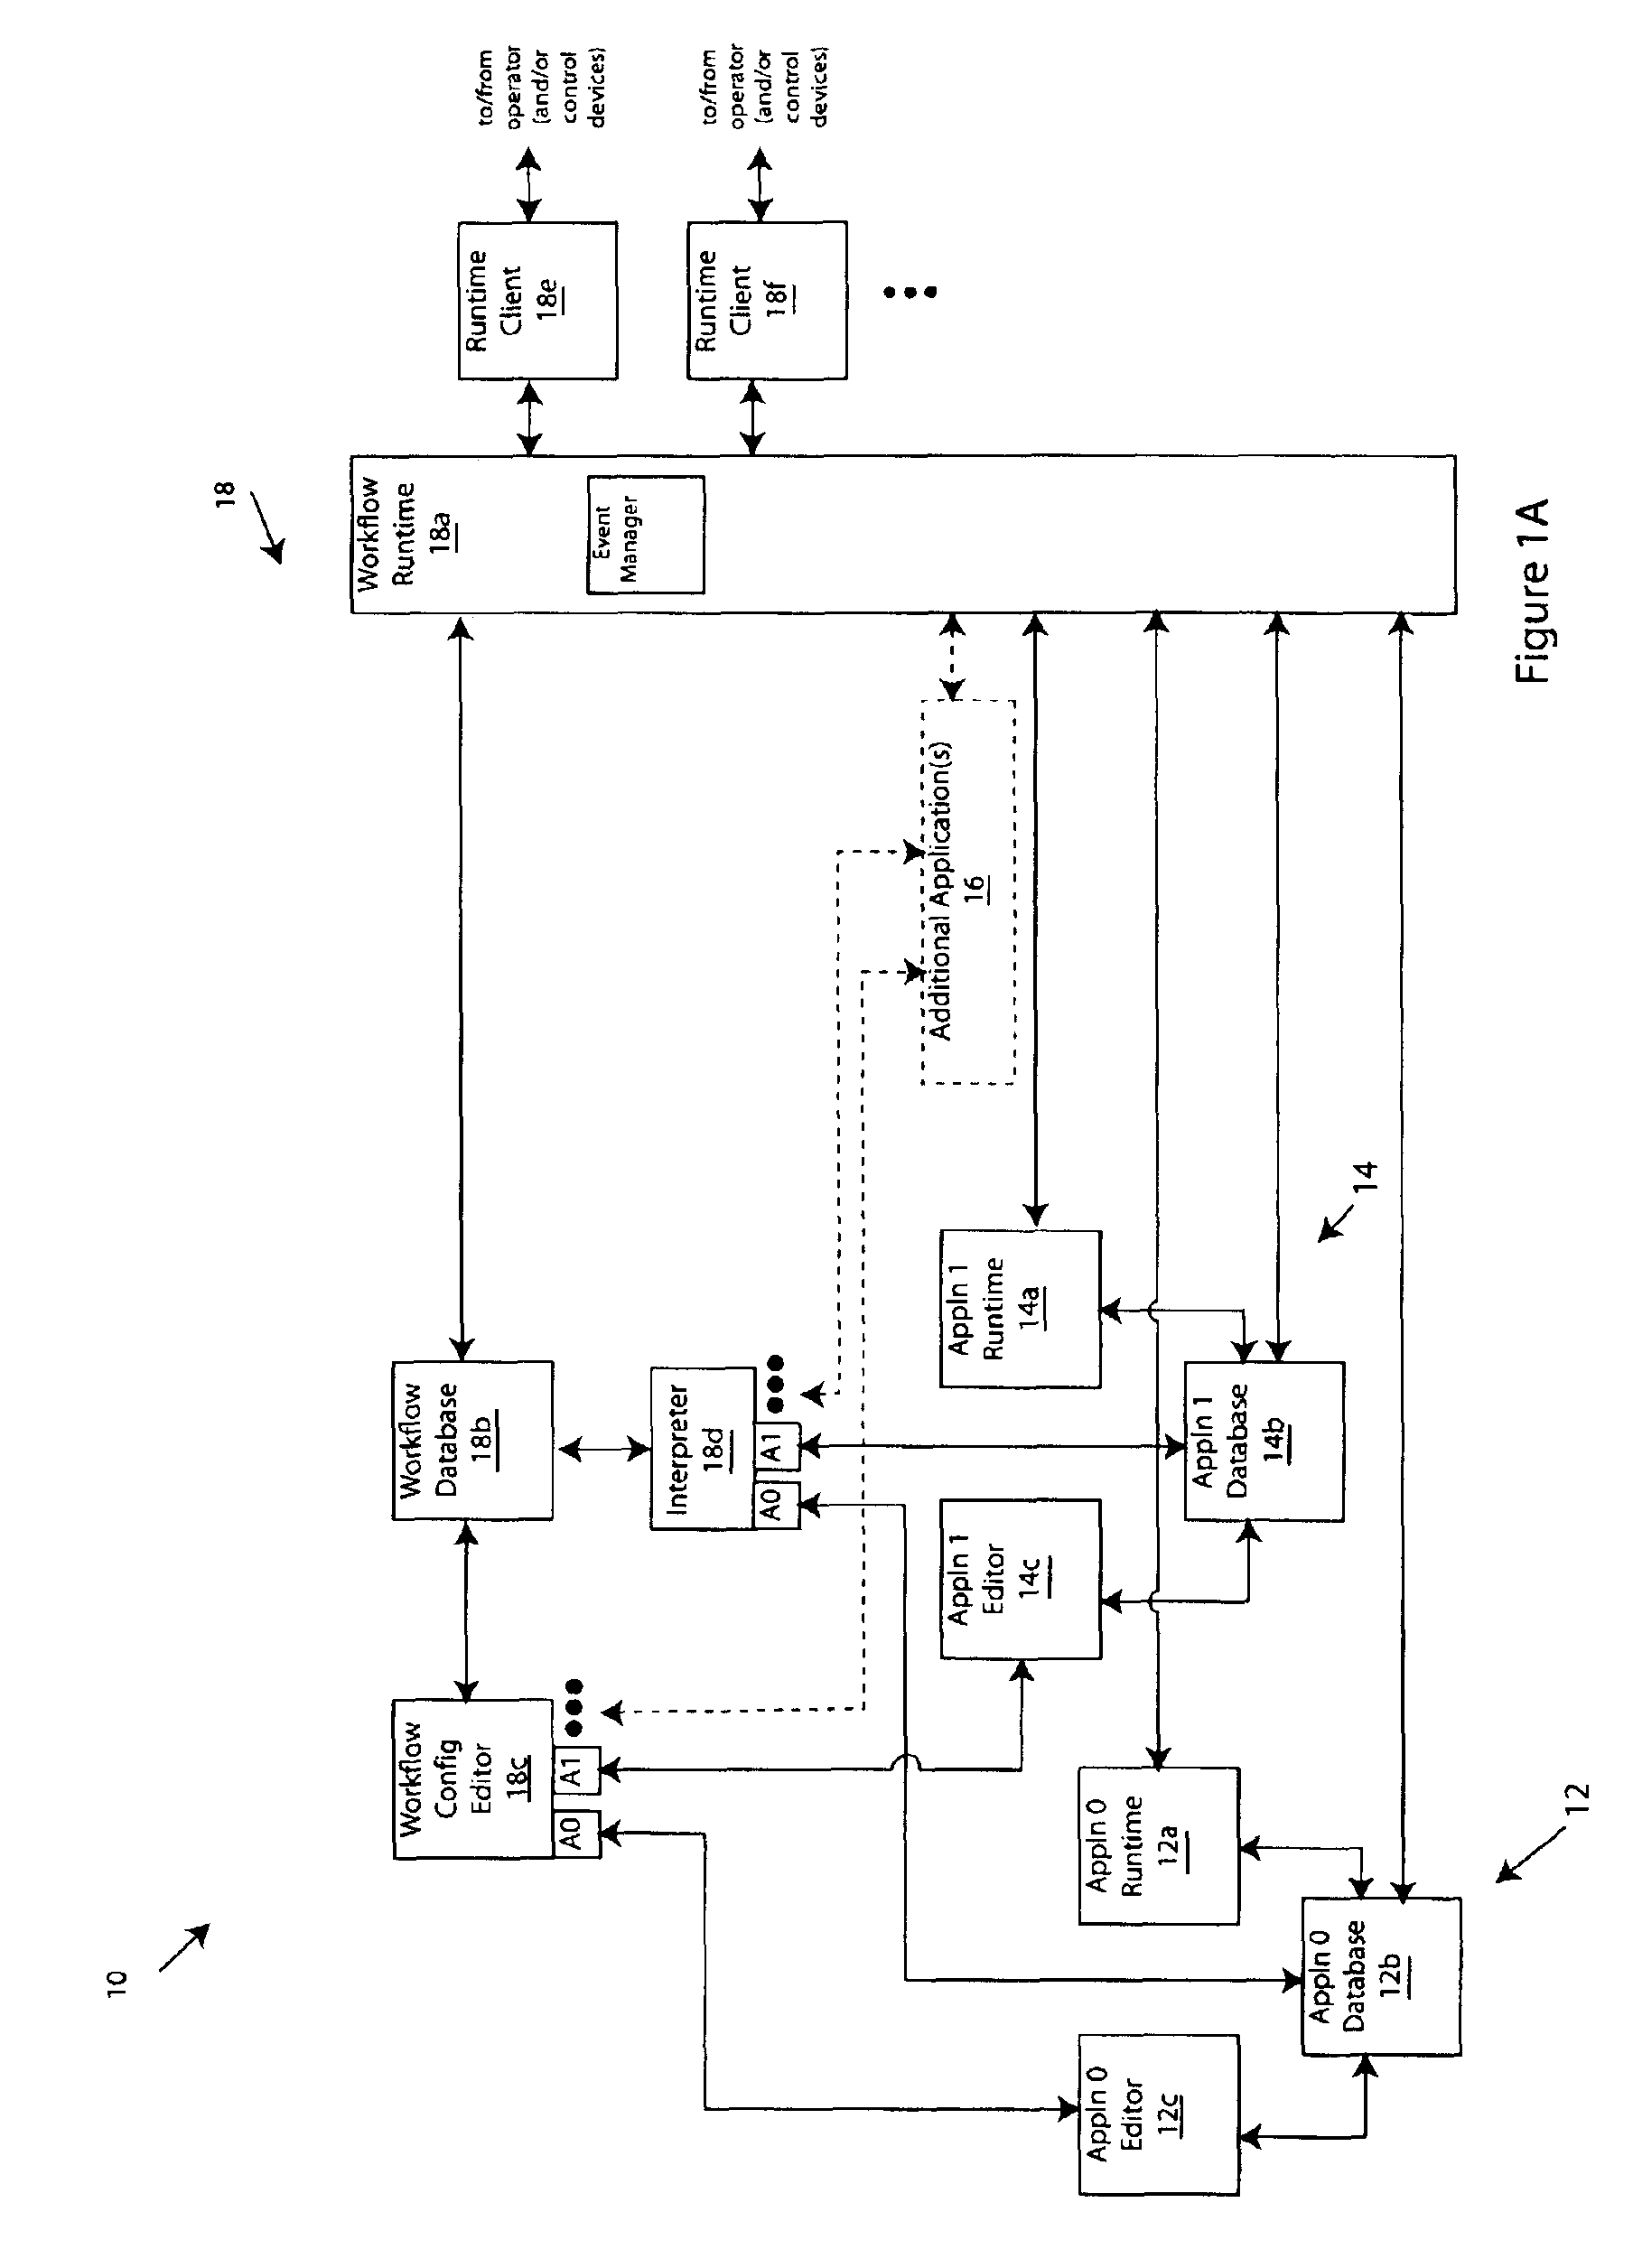 Methods and apparatus for process, factory-floor, environmental, computer aided manufacturing-based or other control system with unified messaging interface